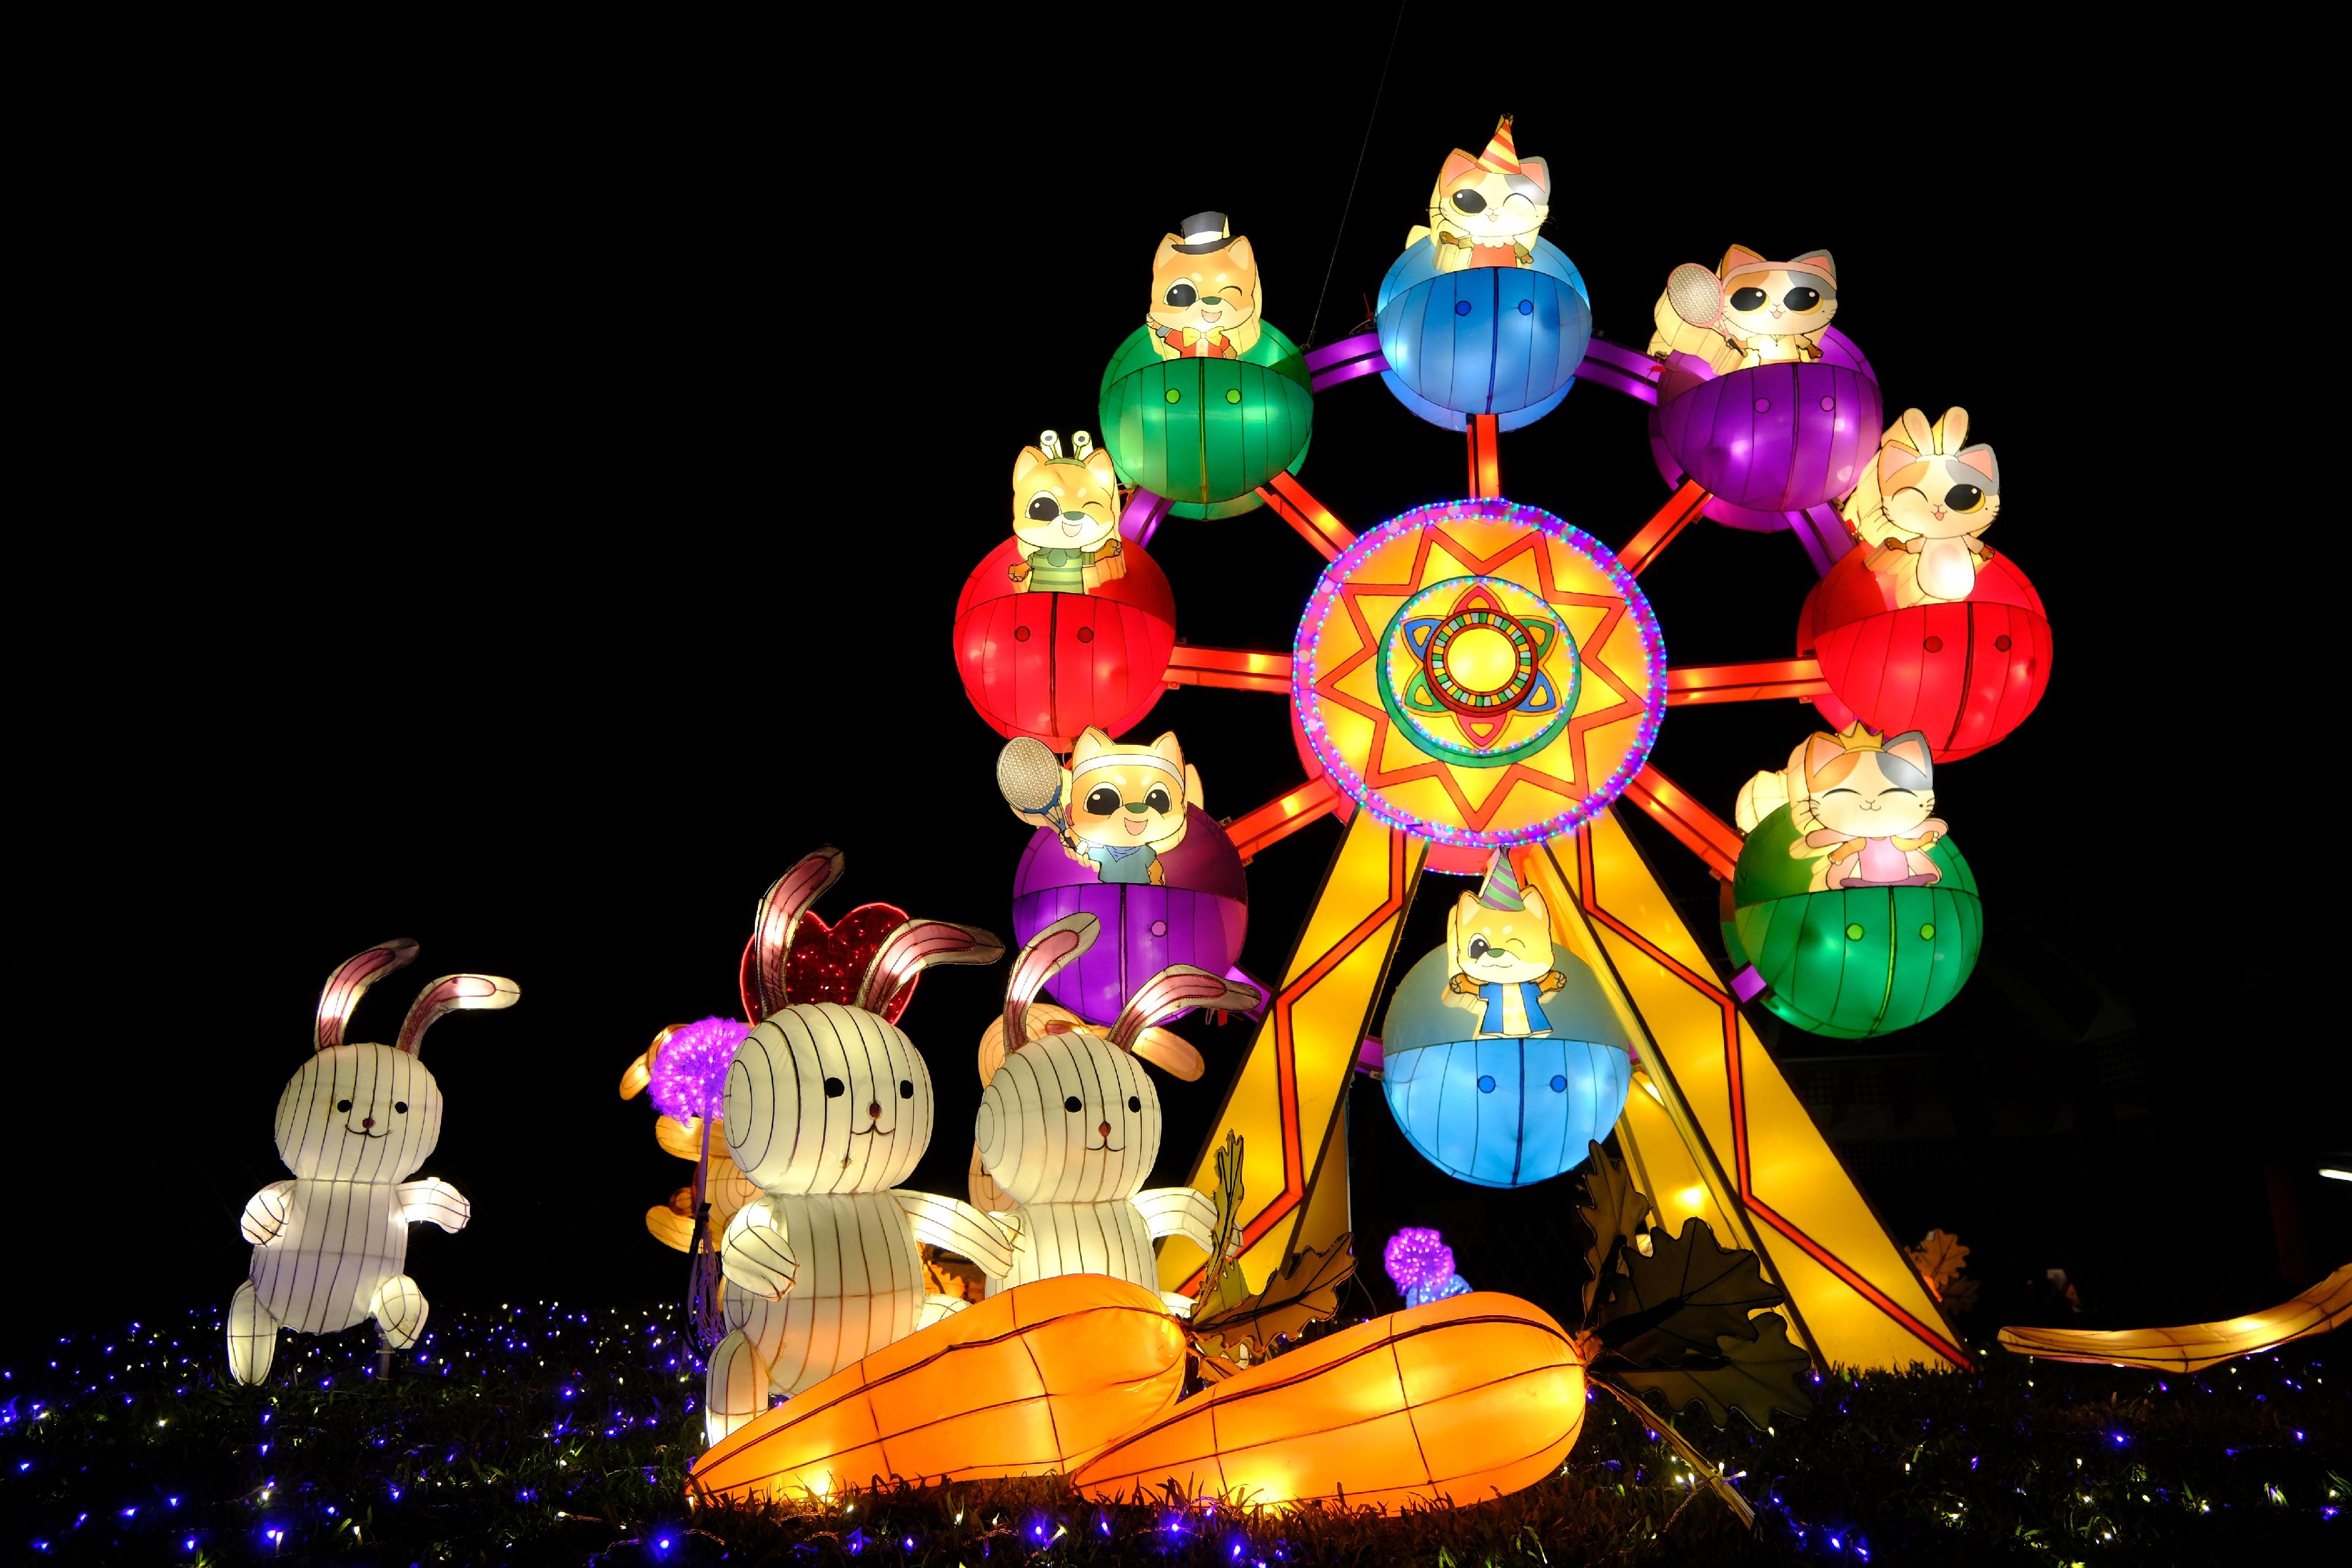 The Leisure and Cultural Services Department will showcase spectacular lantern displays of different themes at the Mid-Autumn Lantern Carnivals in Victoria Park, Sha Tin Park and Tuen Mun Park from tomorrow (September 23) until October 2. A vast range of activities will also be organised in the three parks at different dates. Photo shows a colourful ferris wheel lantern at Tuen Mun Park.